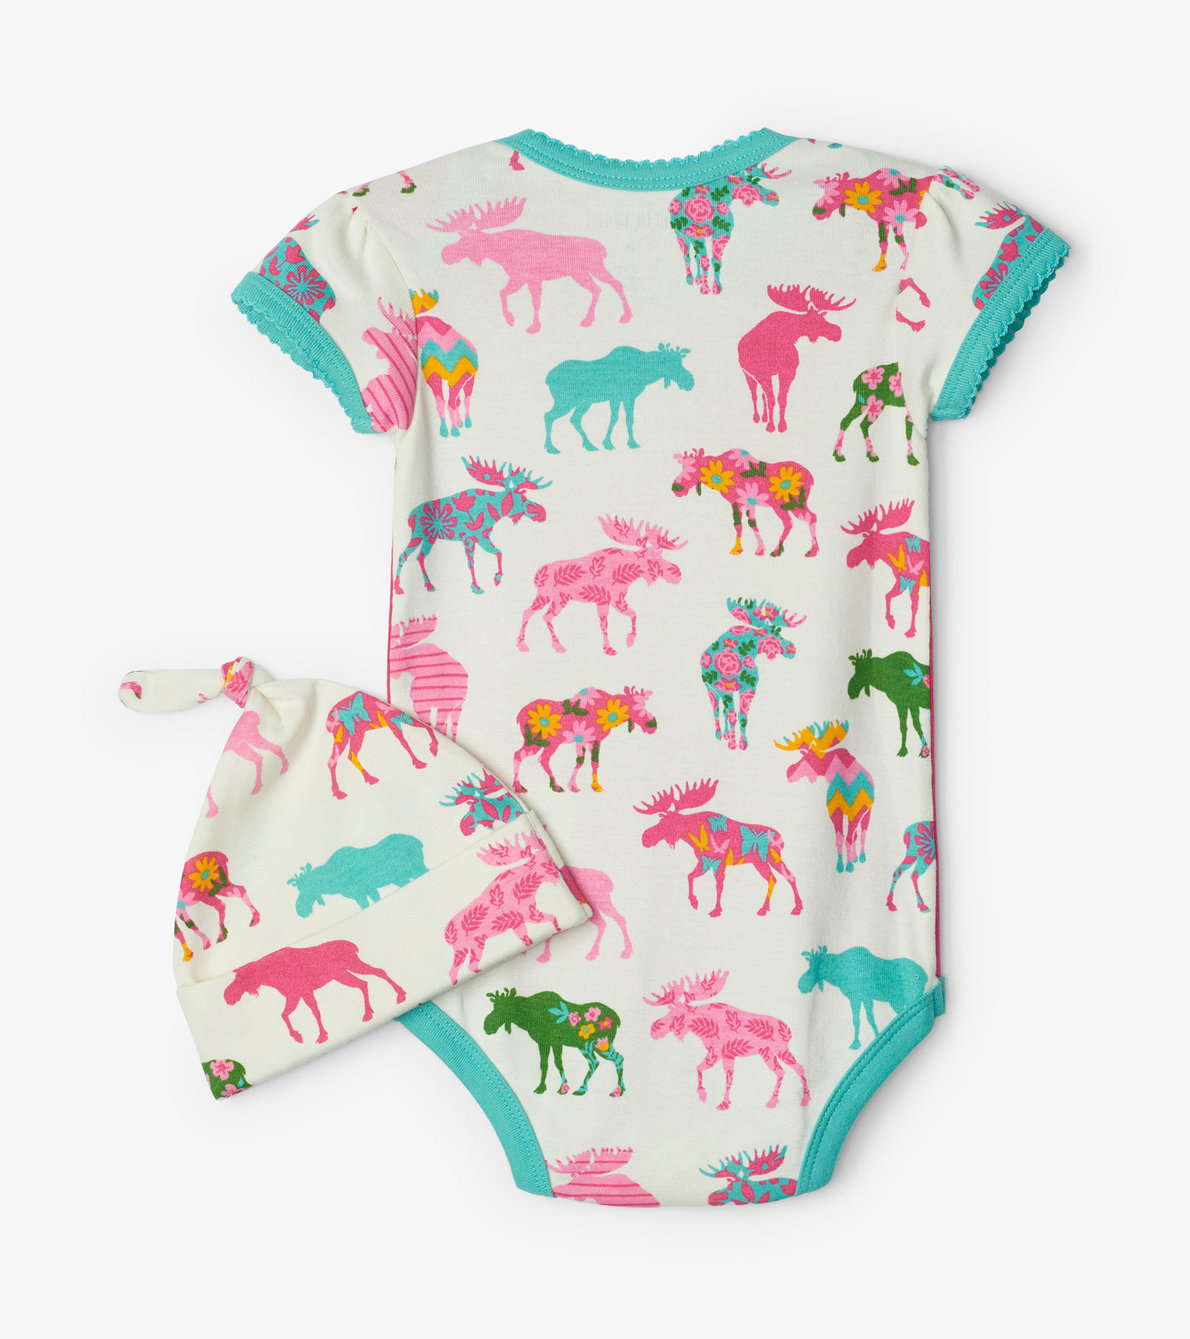 View larger image of Patterned Moose Baby Bodysuit with Hat